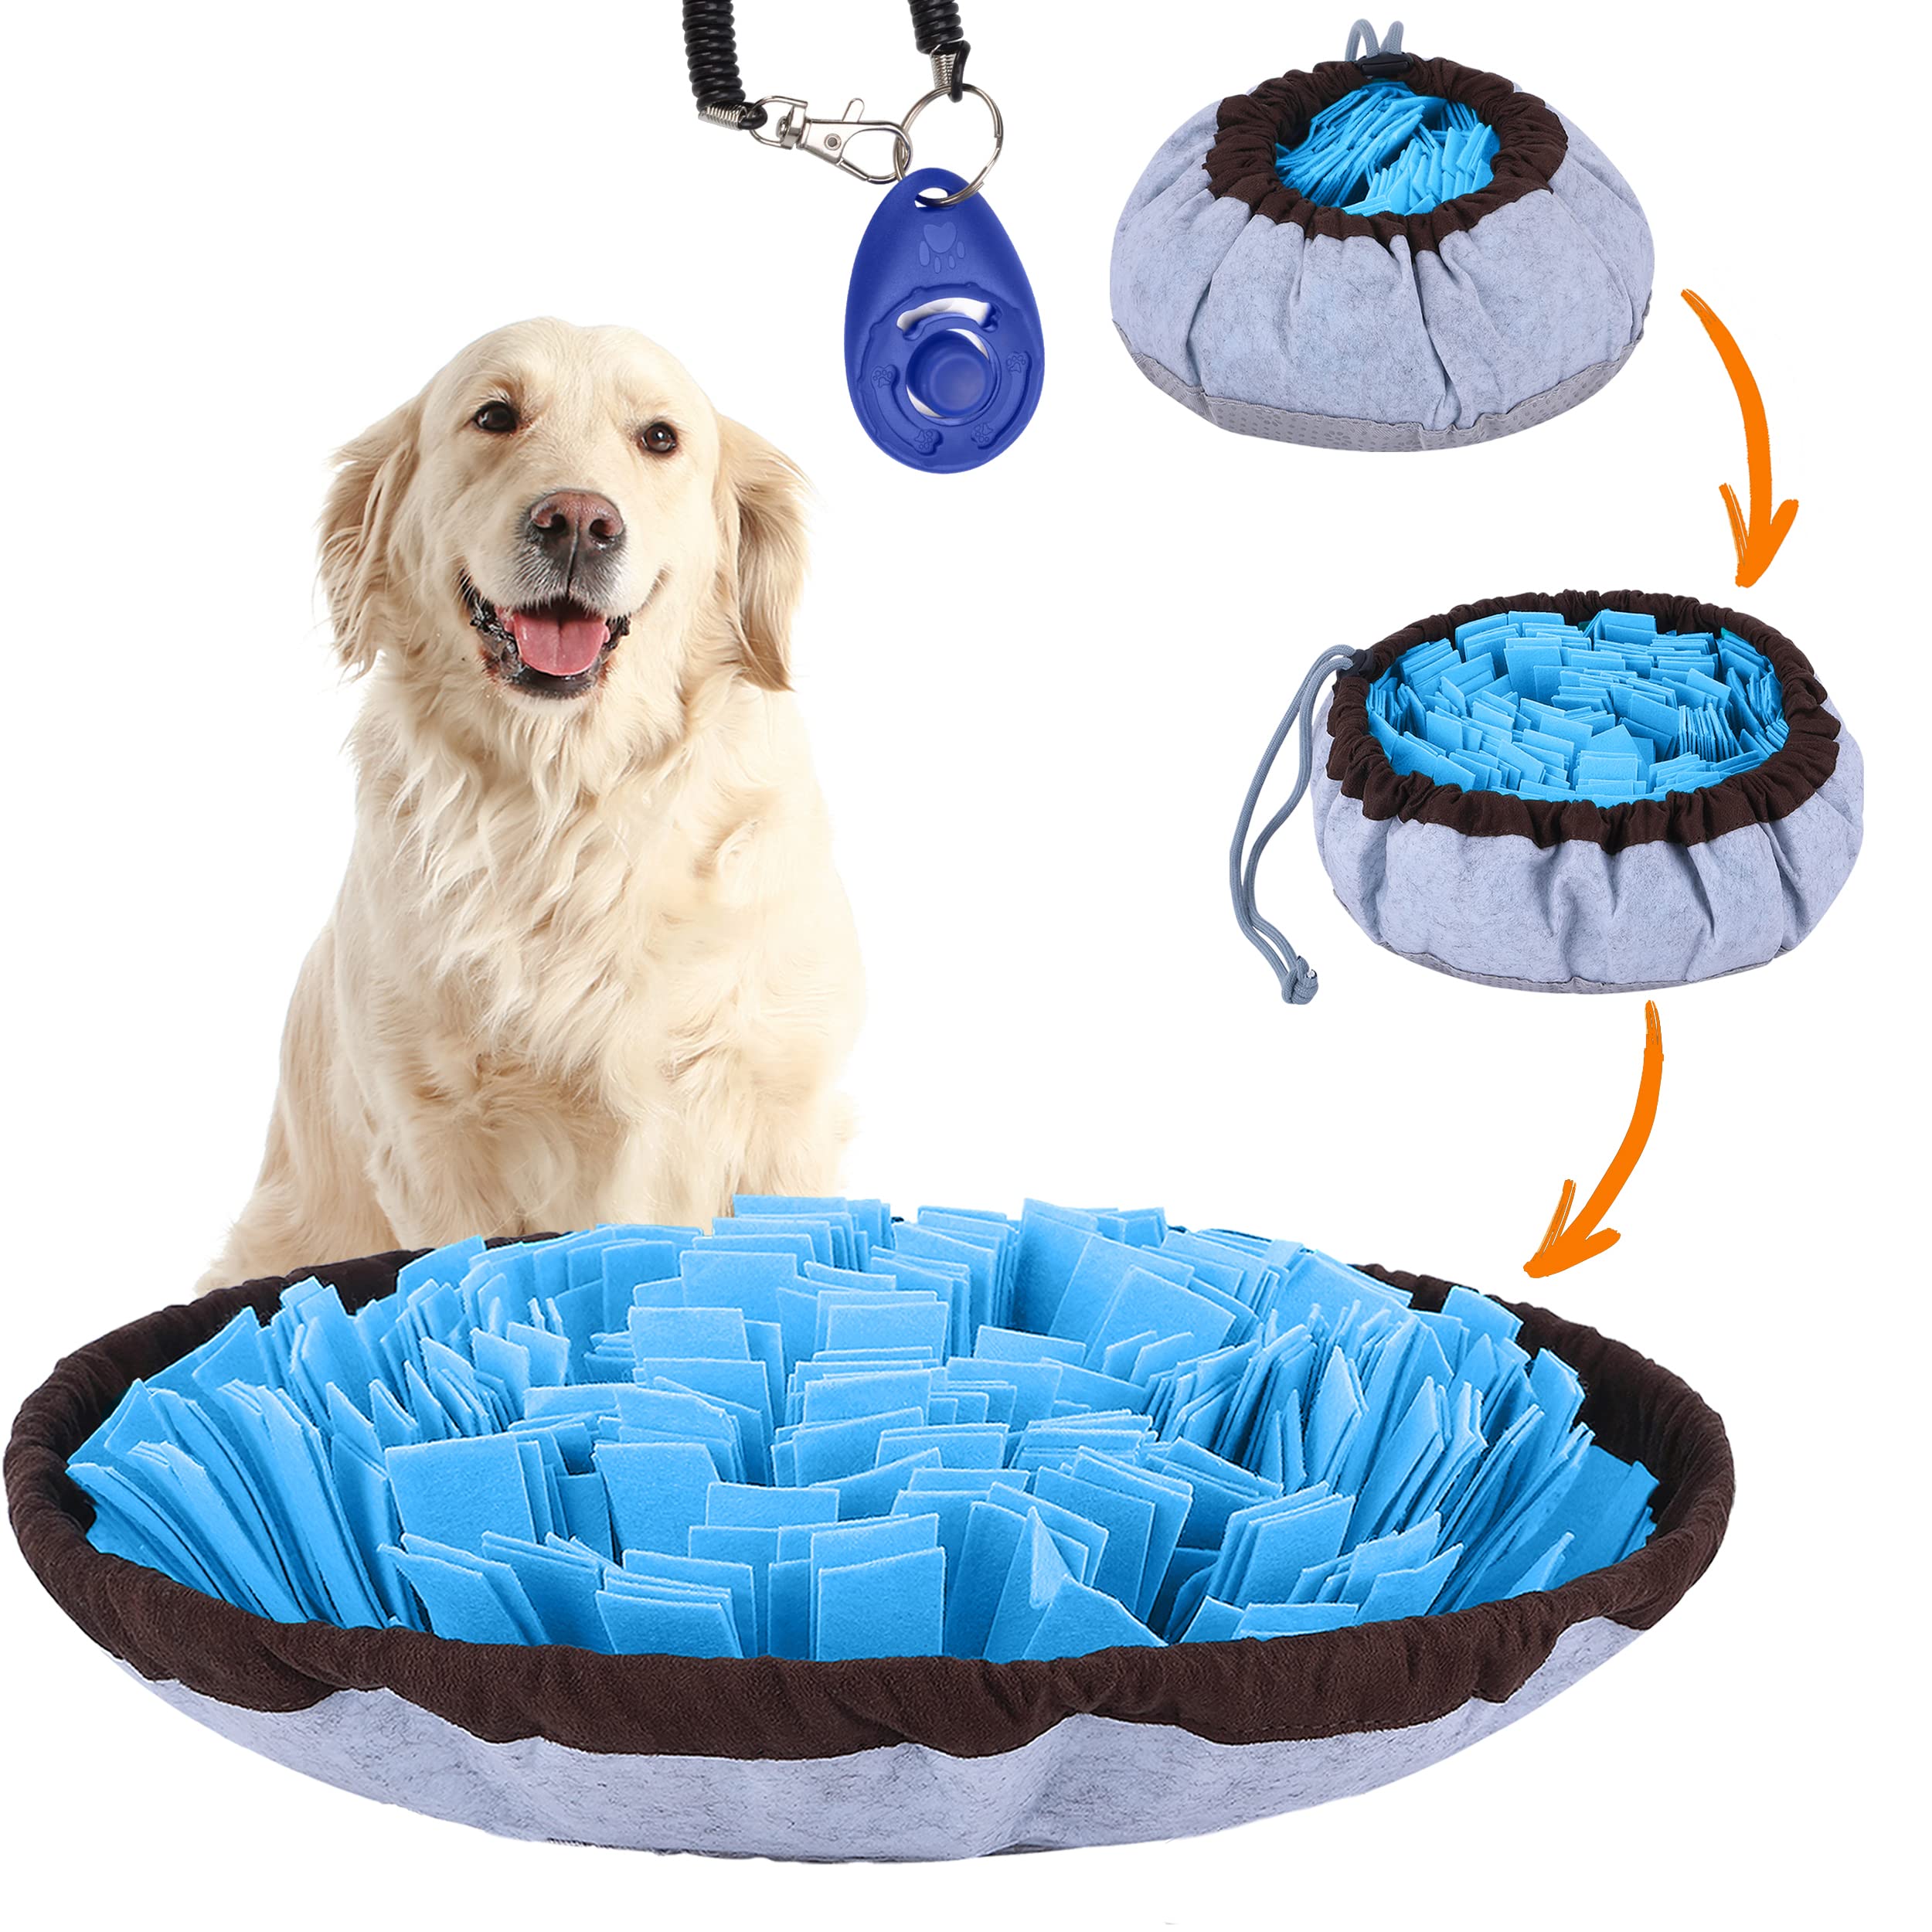 Are enrichment toys actually good for your dog?